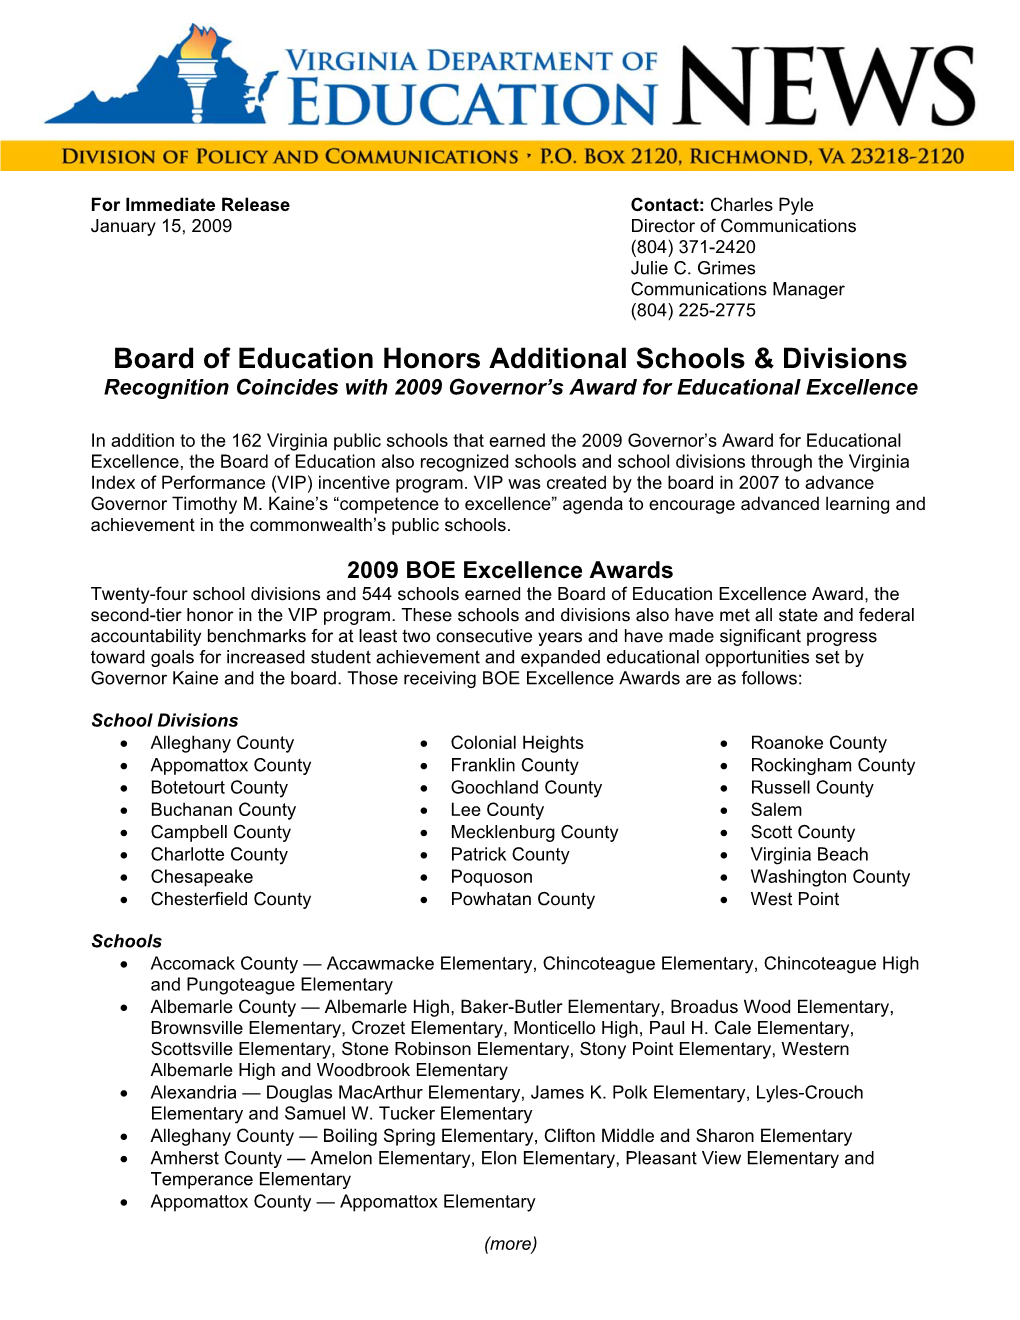 Board of Education Honors Additional Schools & Divisions